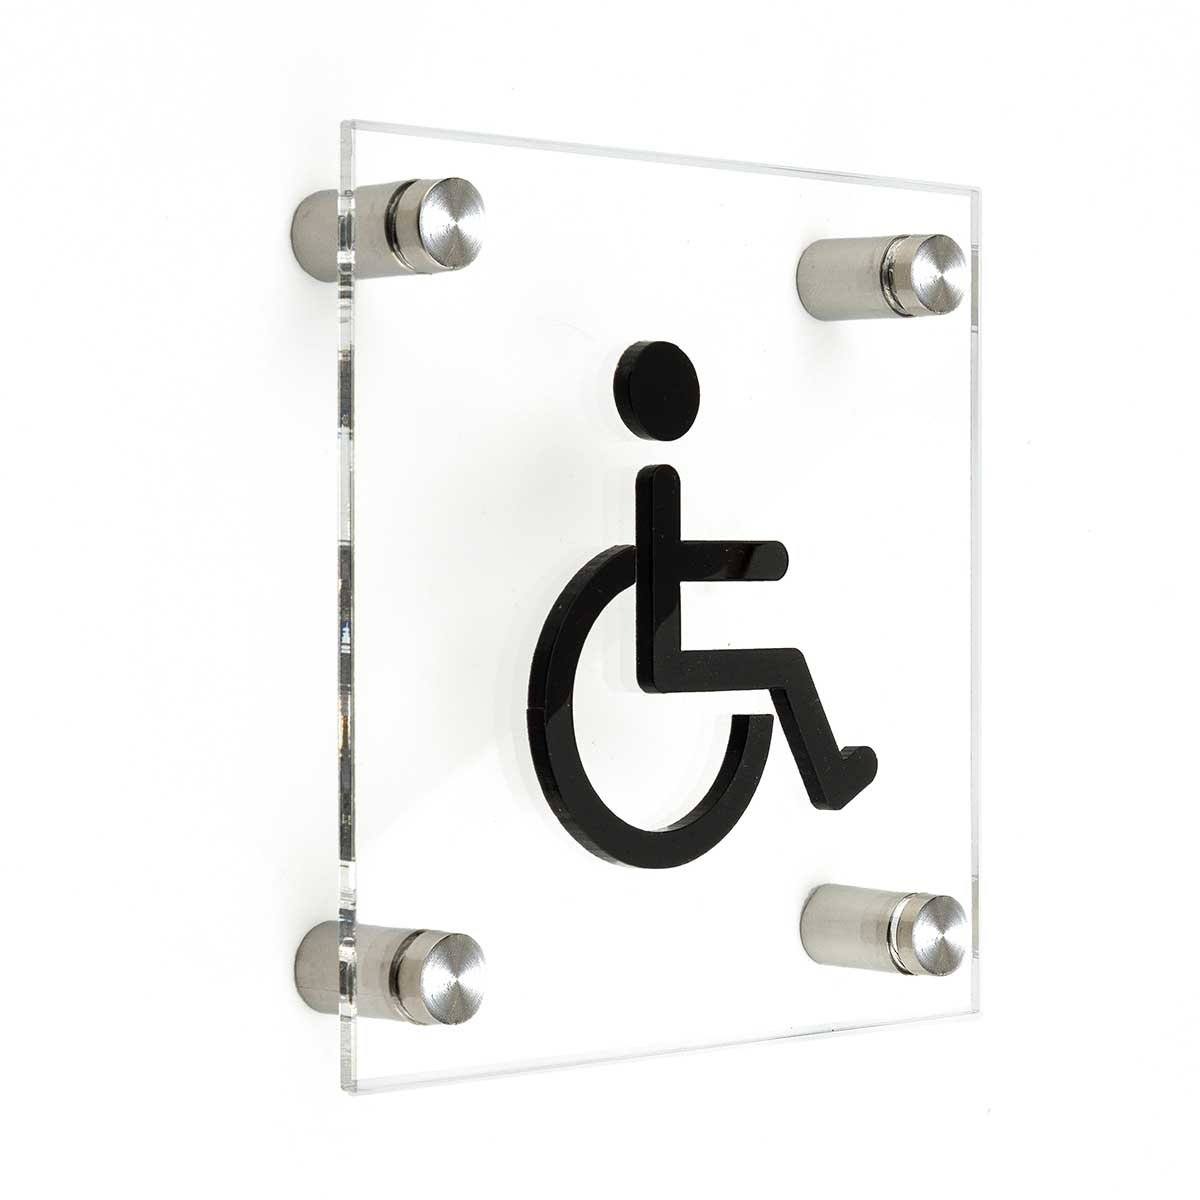 Wheelchairs Sign for Restroom Bathroom Signs transparent acrylic and black arylic letters Bsign